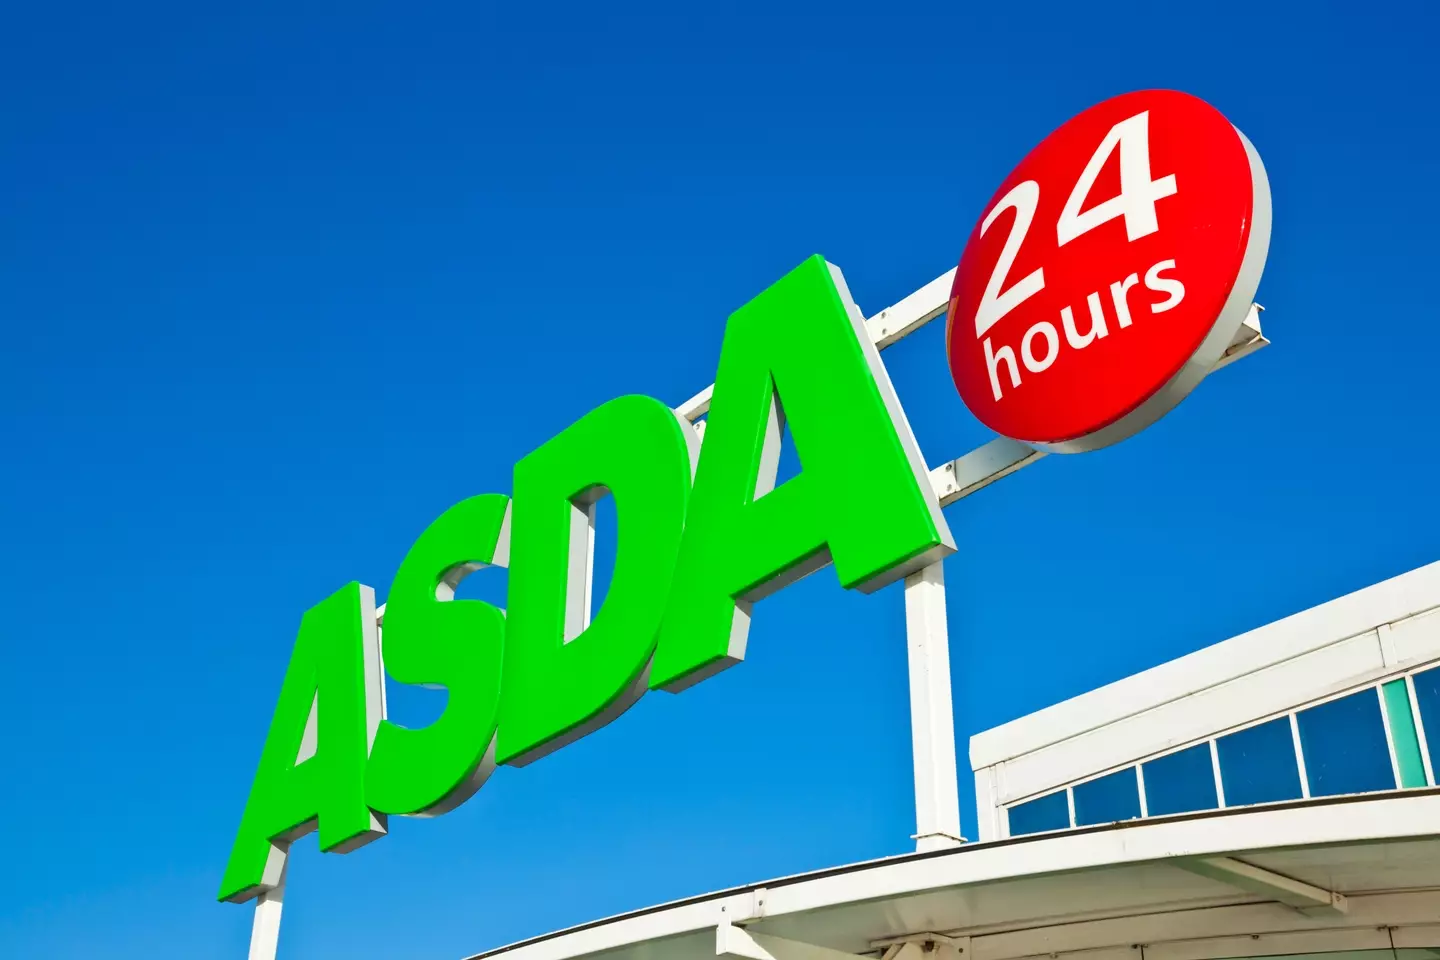 Asda details the producing of the bananas in-store on its website.